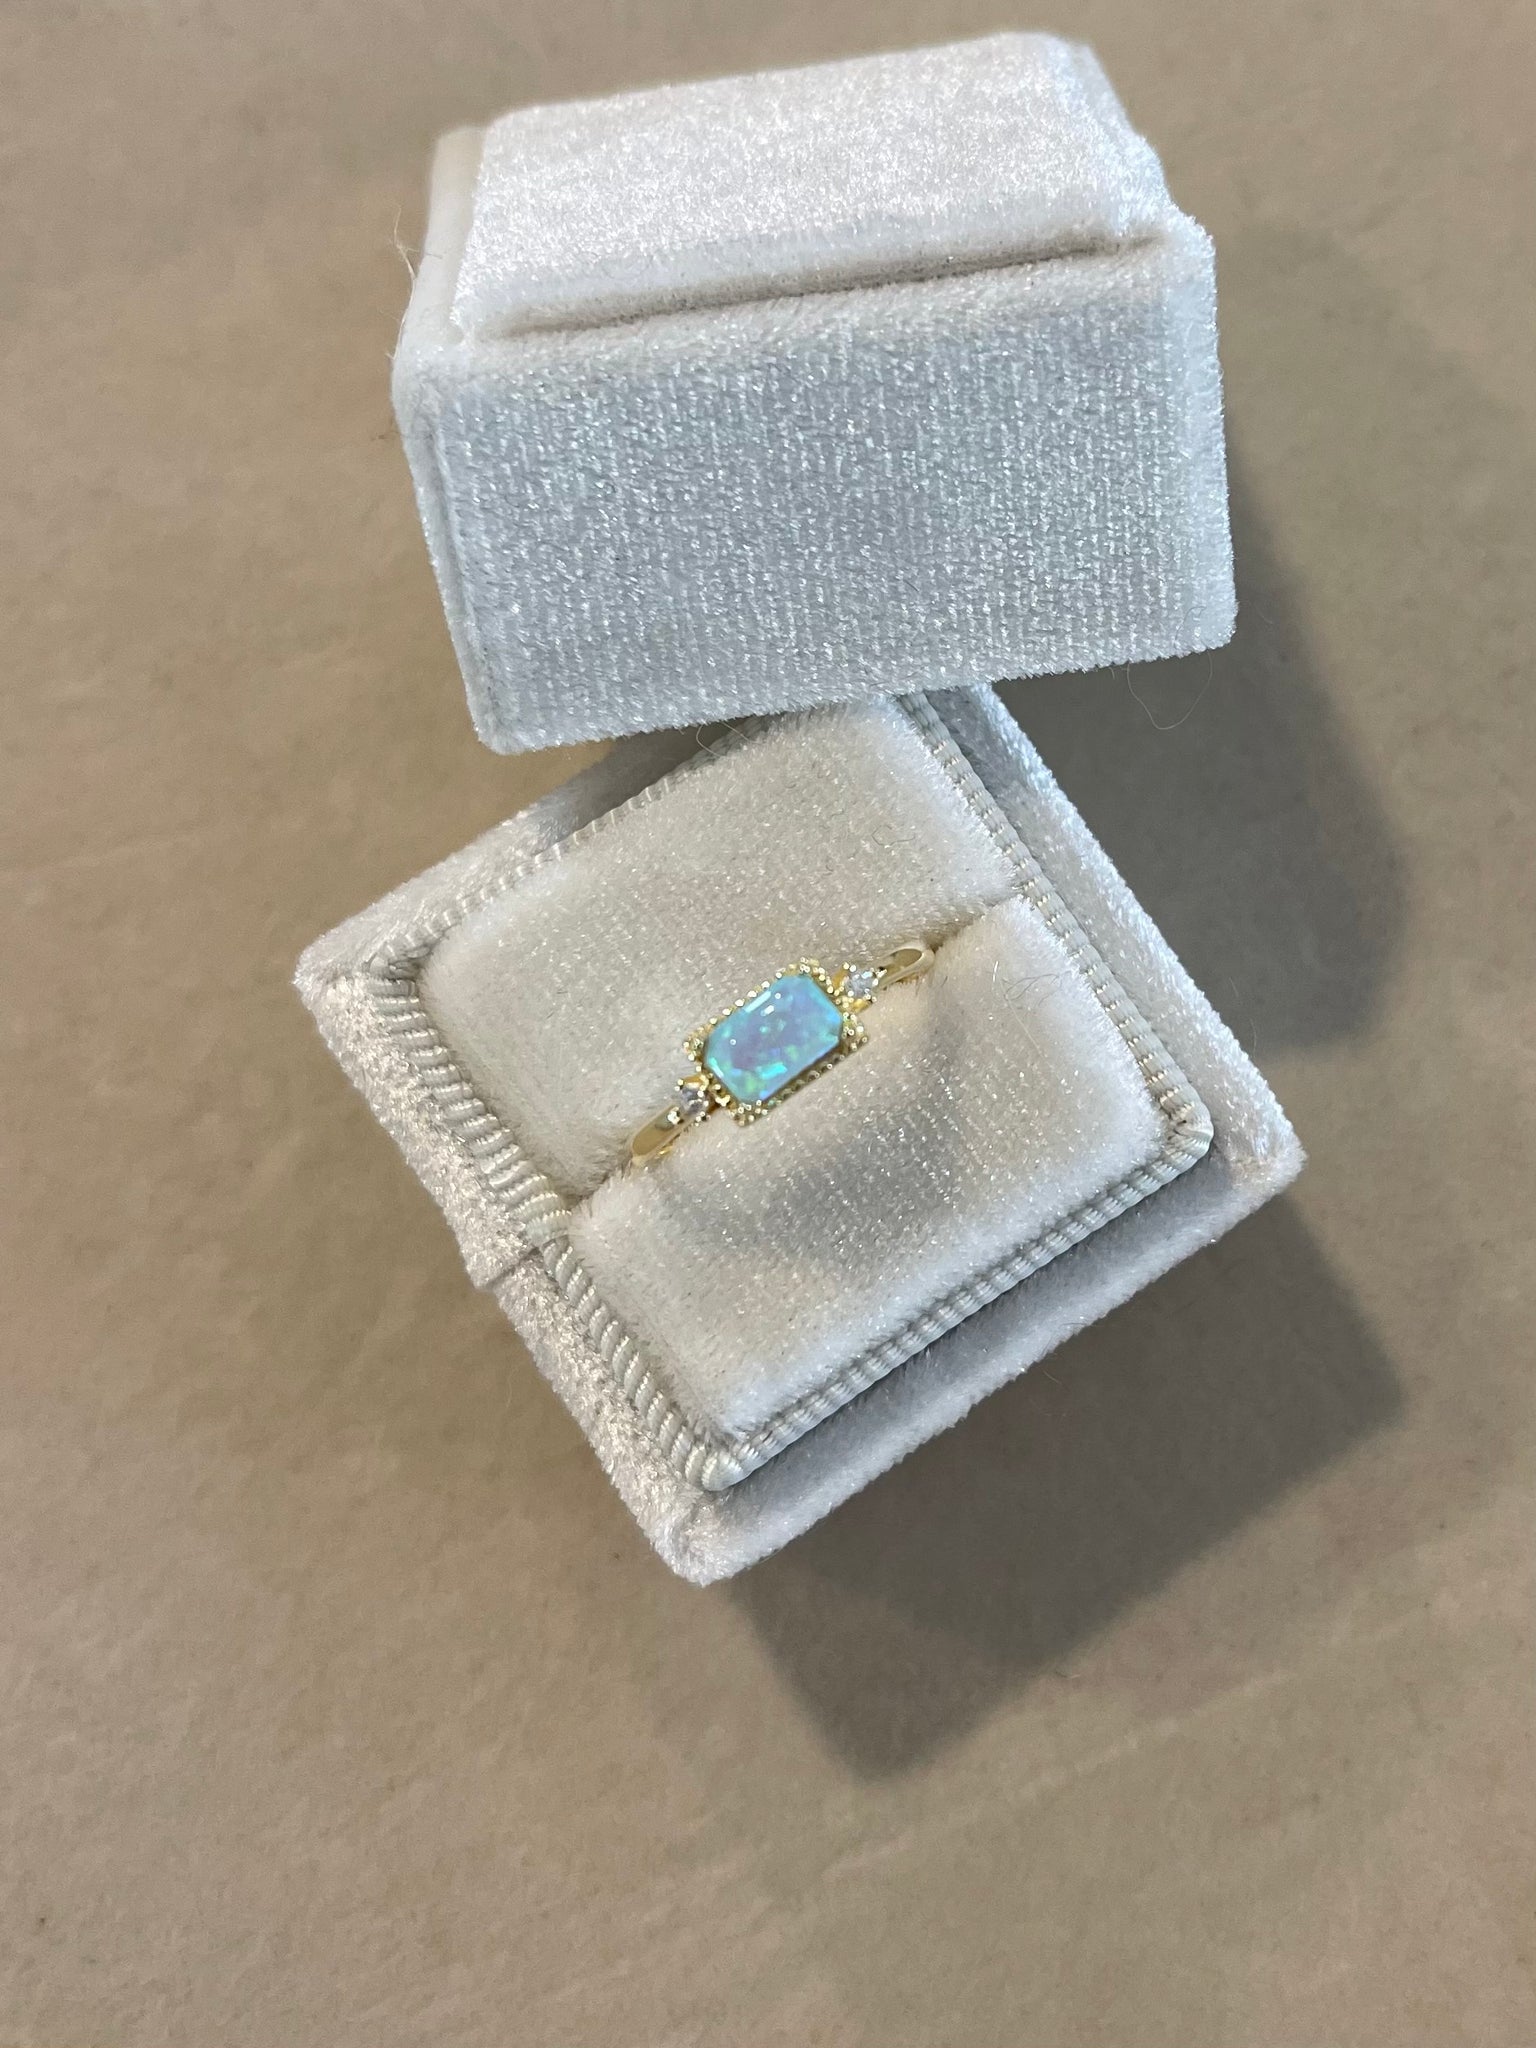 Blue Opal Ring in Gold - 925 Sterling Silver